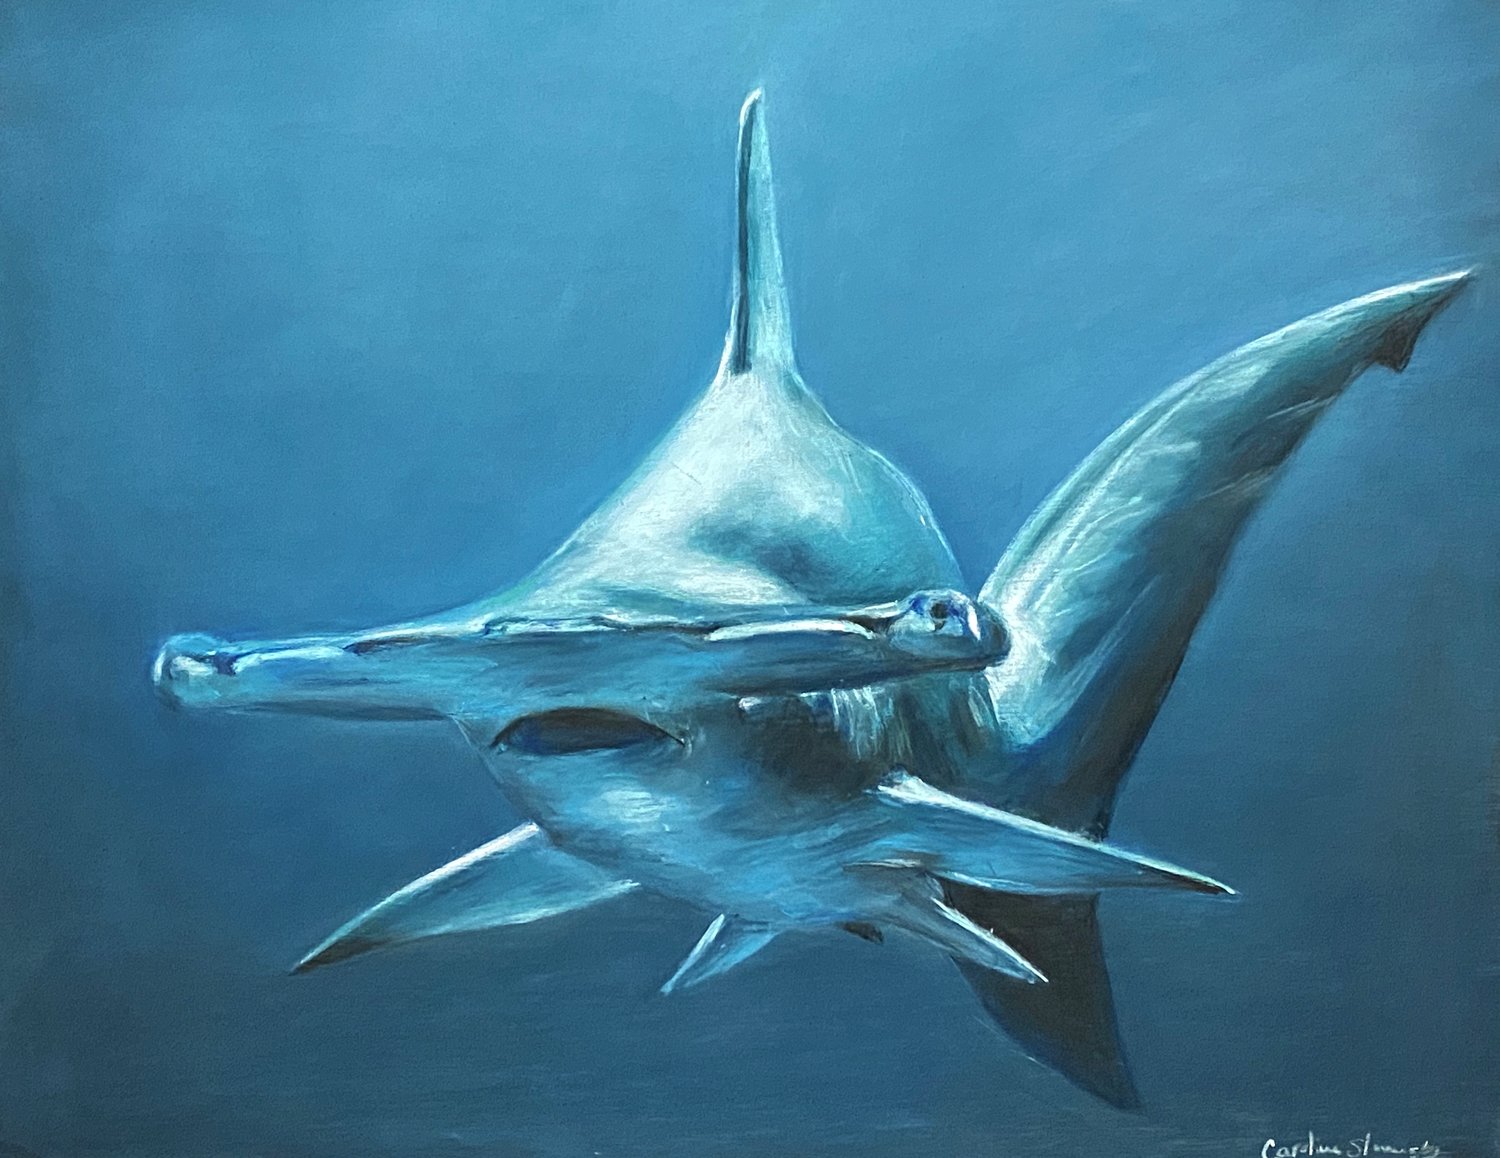 “Moonlit Hammerhead” is a highlight of Caroline Slovensky’s series of marine animal portraits. Her unique style of pastel on wood creates an extra depth to her medium of choice.